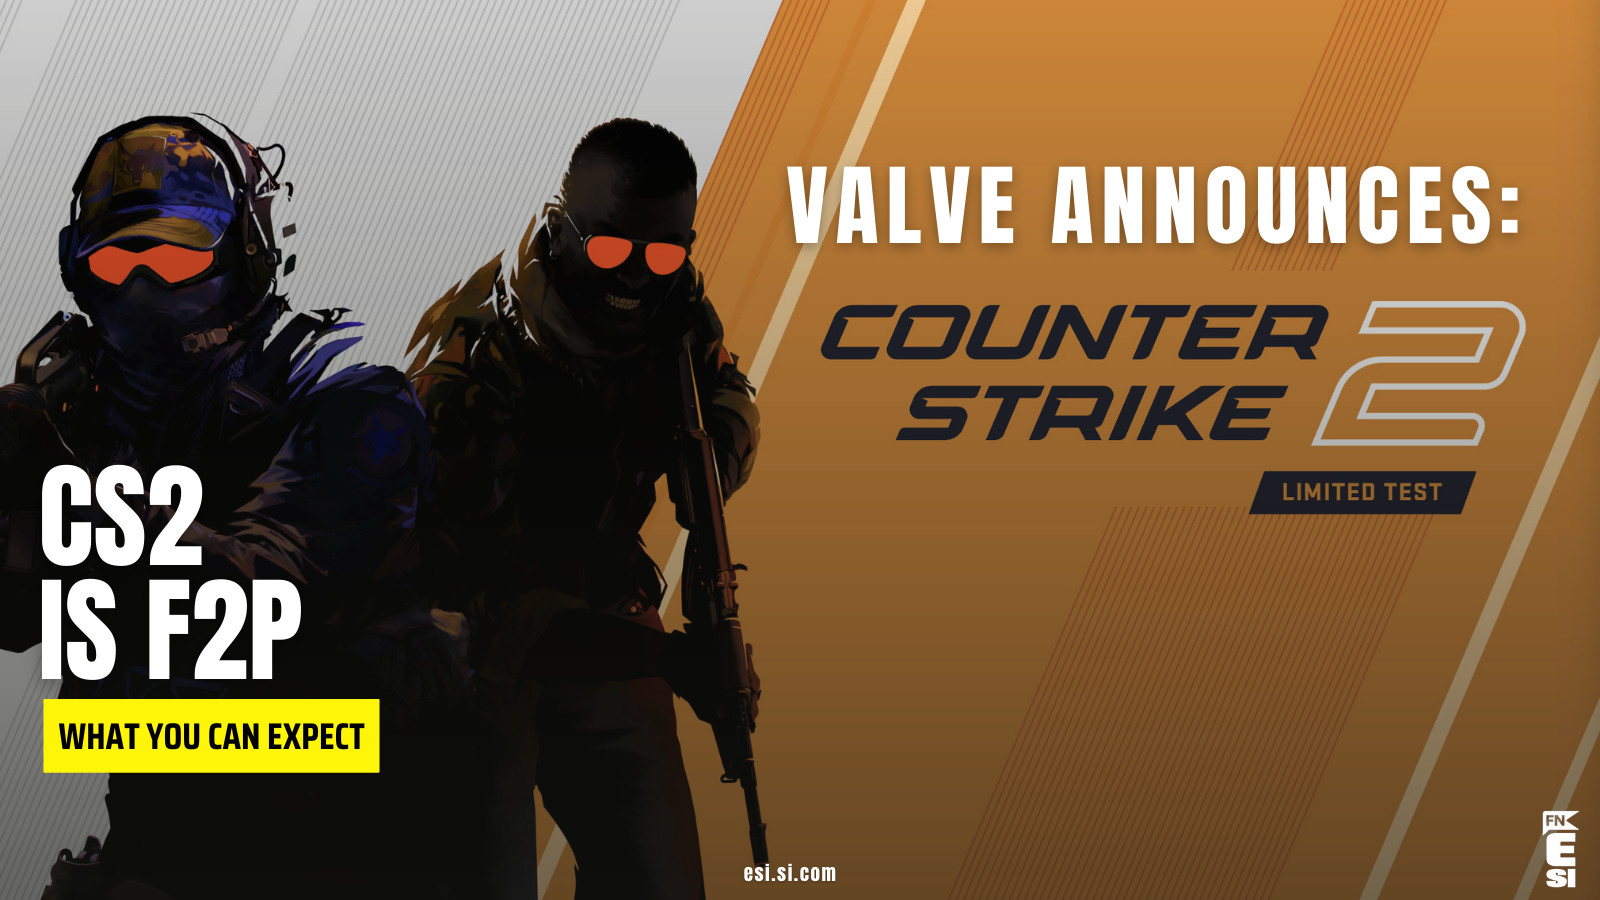 Did you notice this about the Counter-Strike 2 logo?